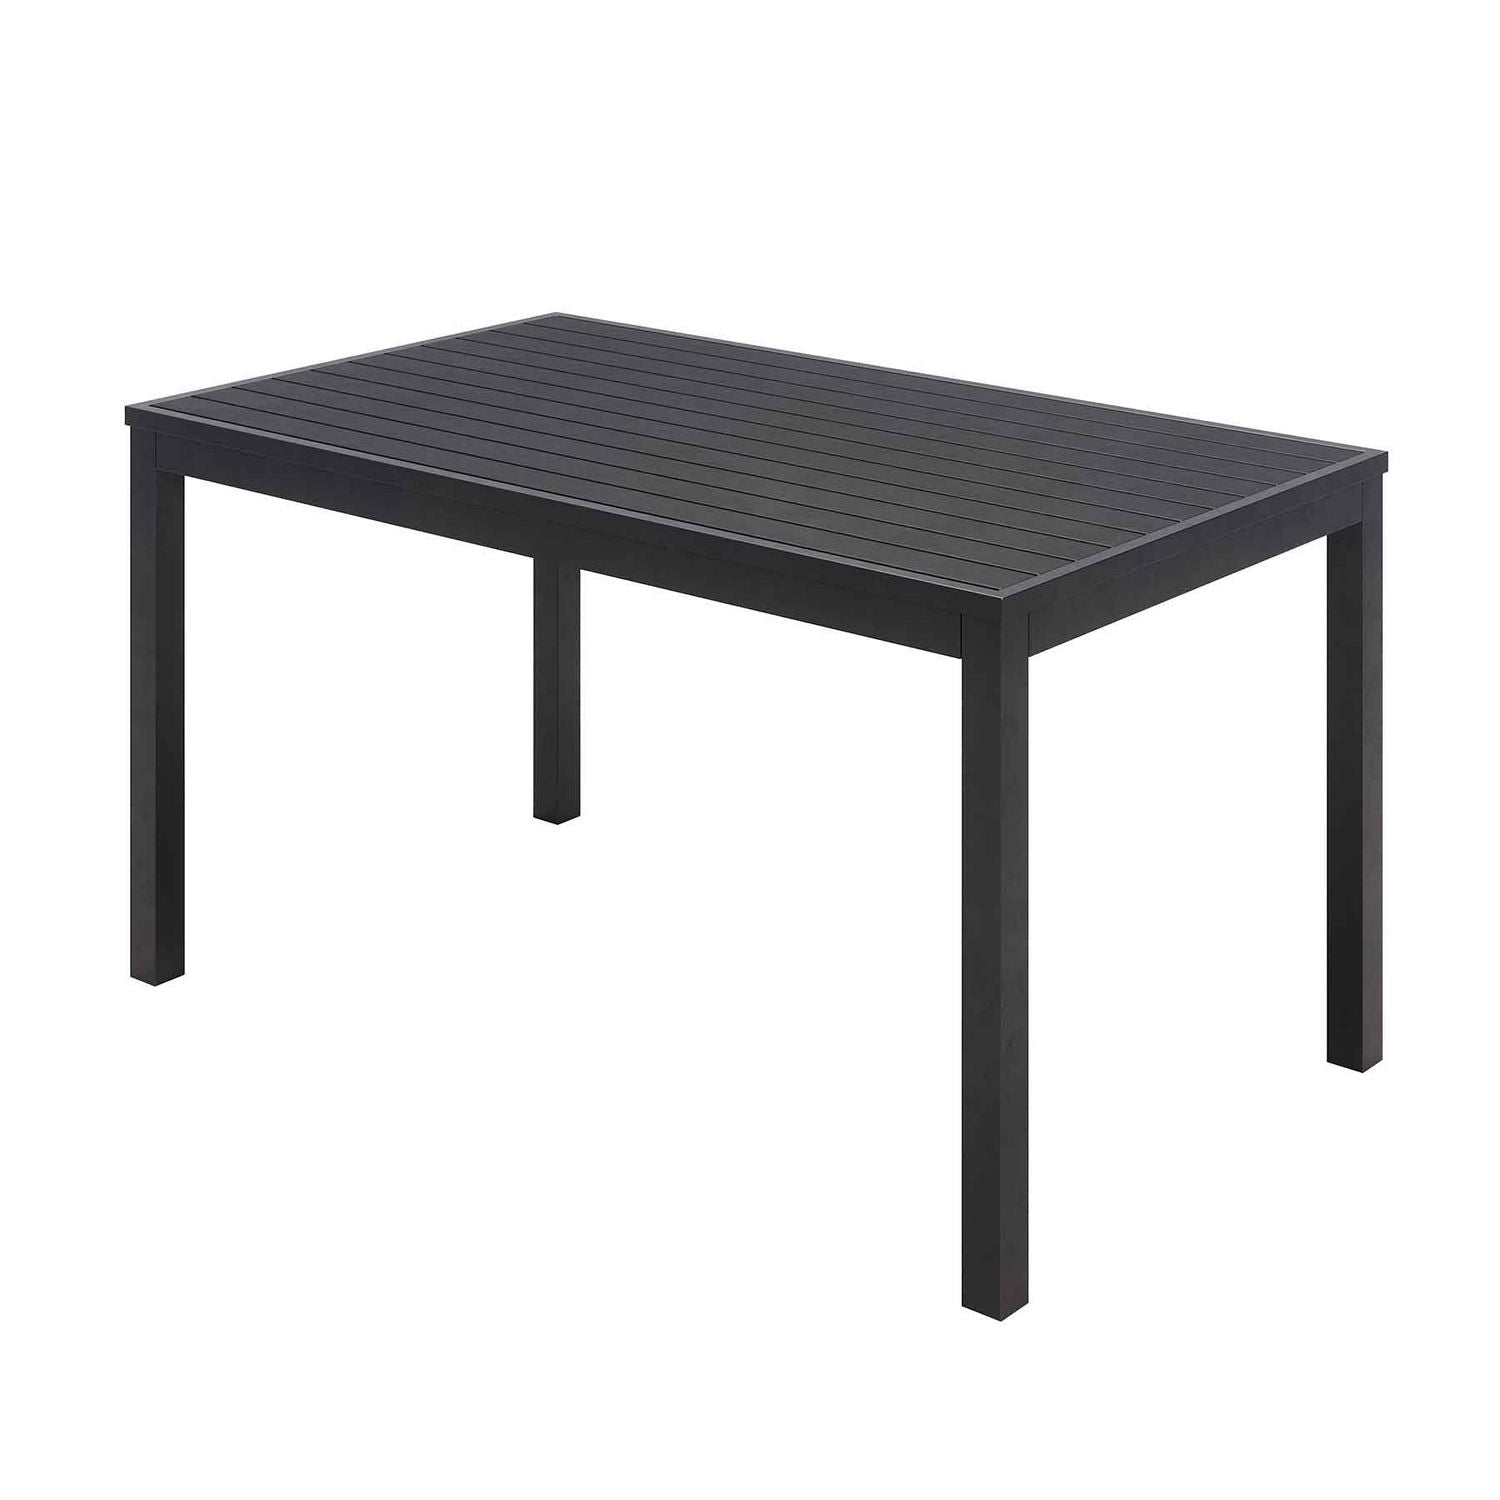 eveleen-outdoor-patio-table-w-two-black-powder-coated-polymer-chairs-and-two-benches-32-x-55-gray-ships-in-4-6-bus-days_kfi840031925152 - 3